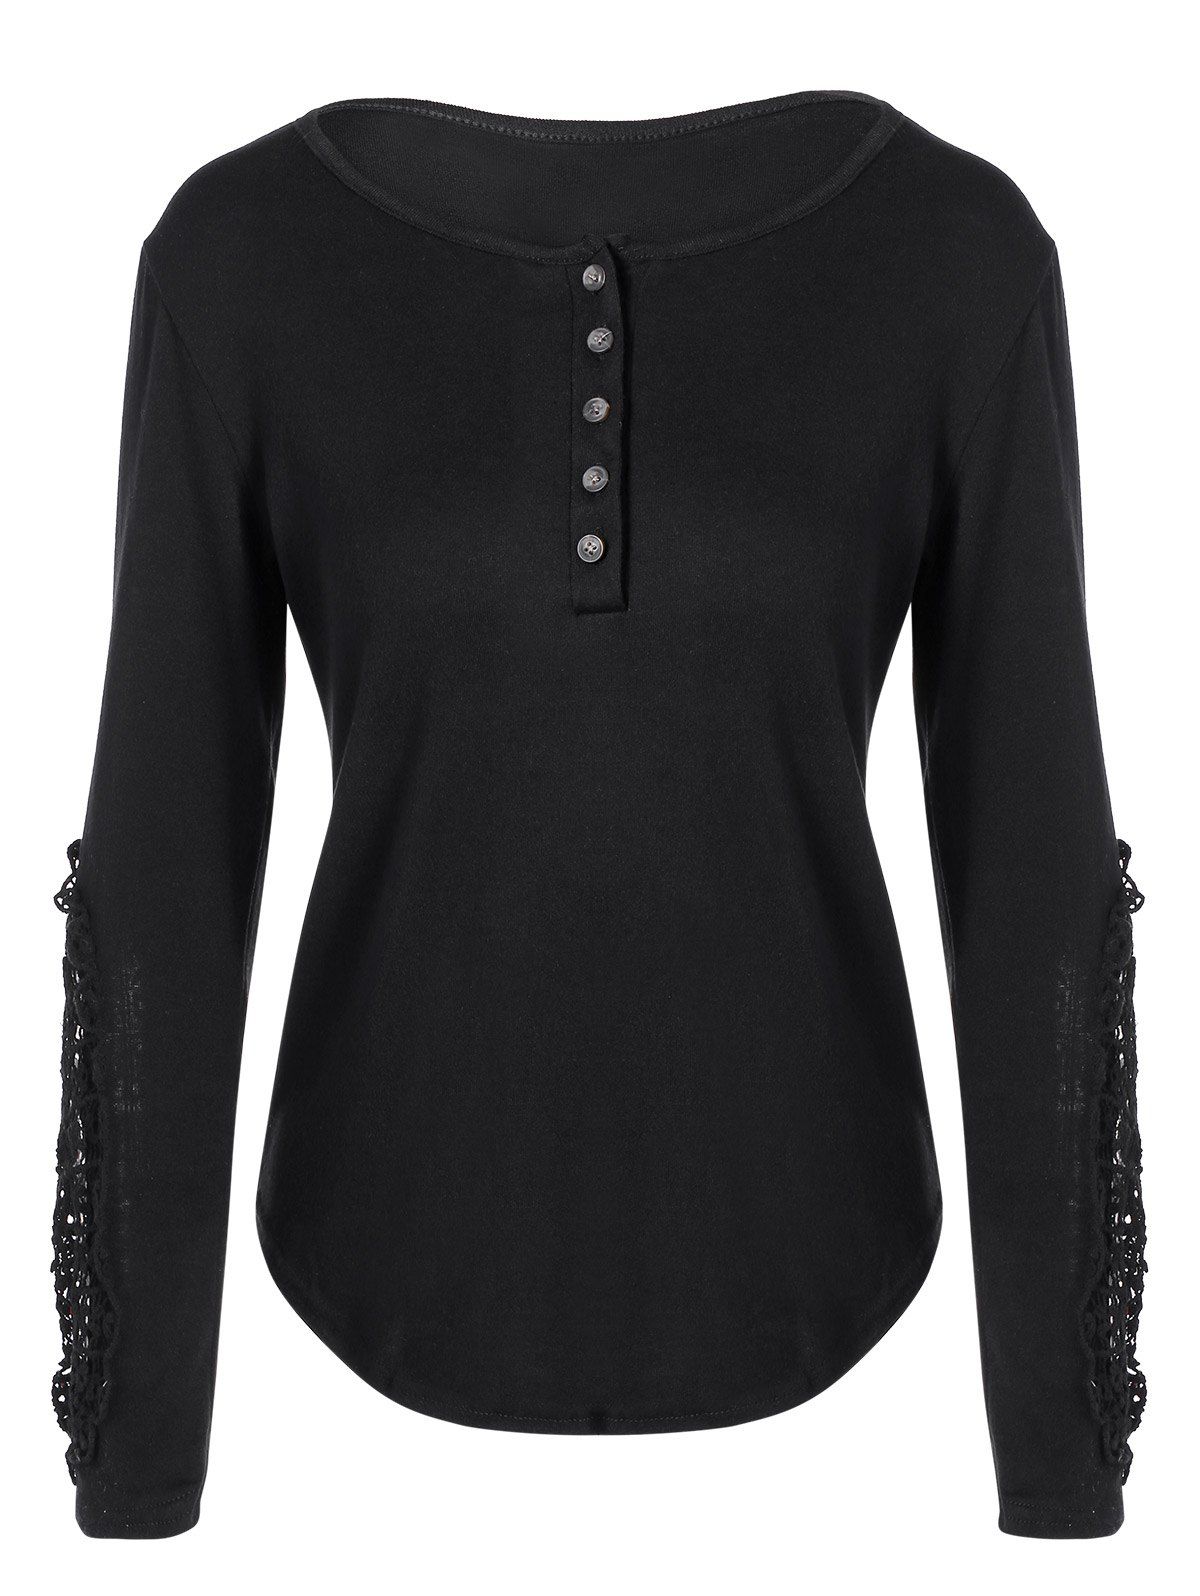 [17% OFF] 2021 Concise Openwork Lace Buttons T-Shirt In BLACK | DressLily